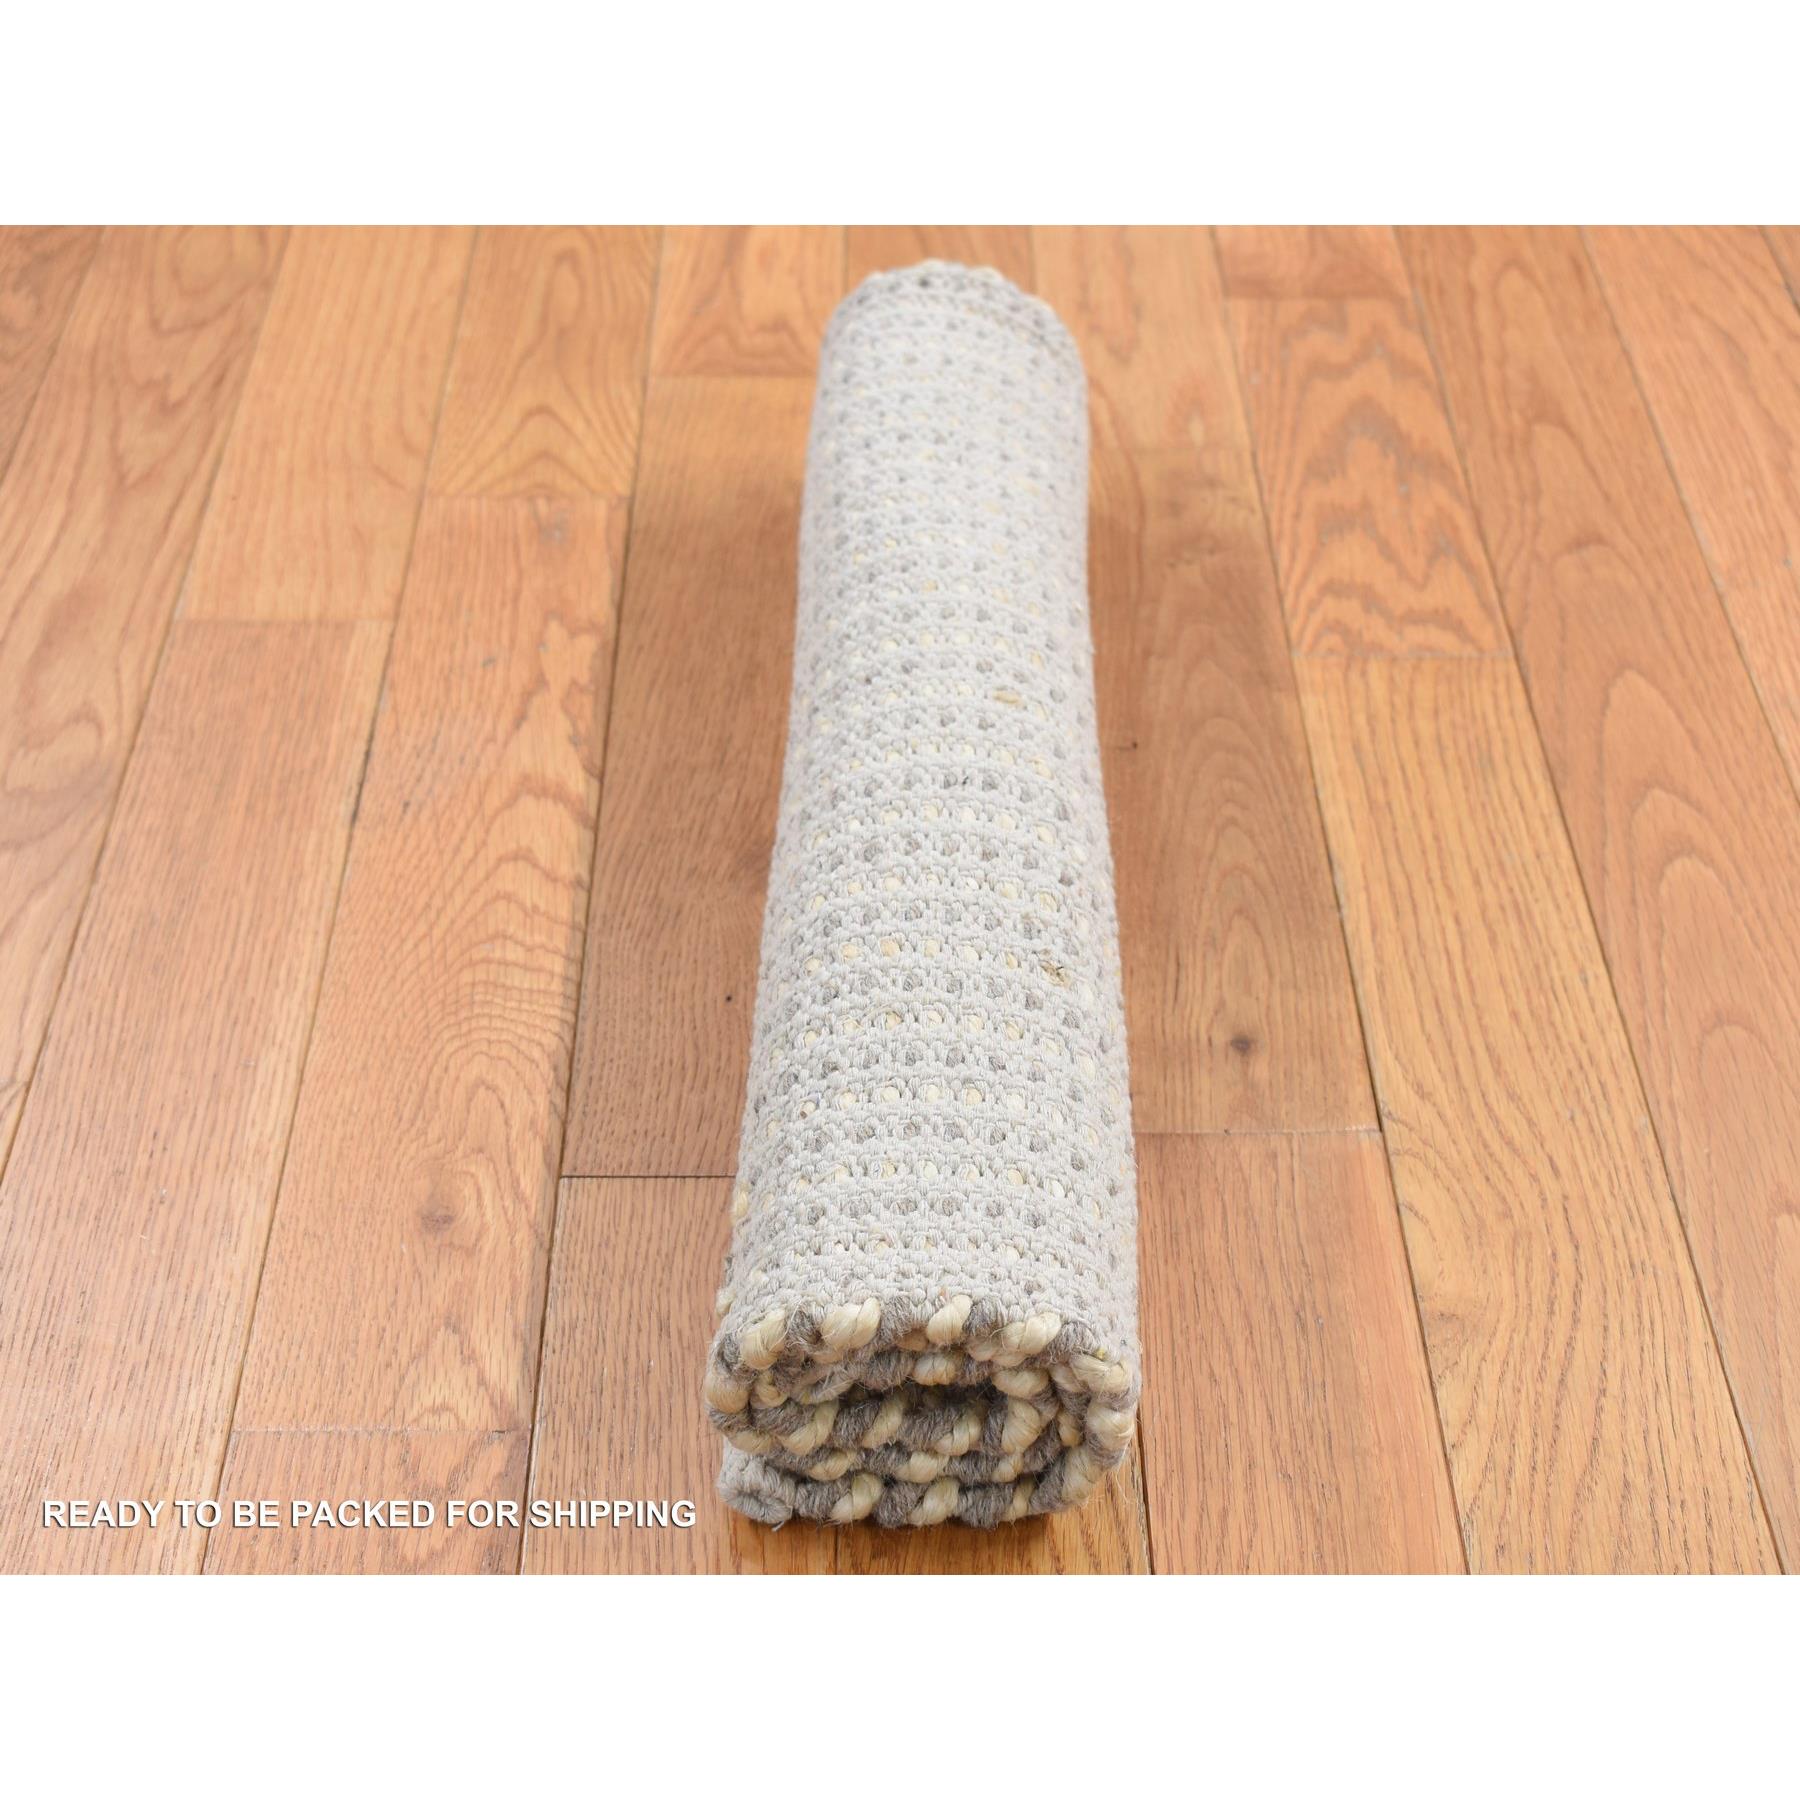 Modern-and-Contemporary-Hand-Loomed-Rug-437085